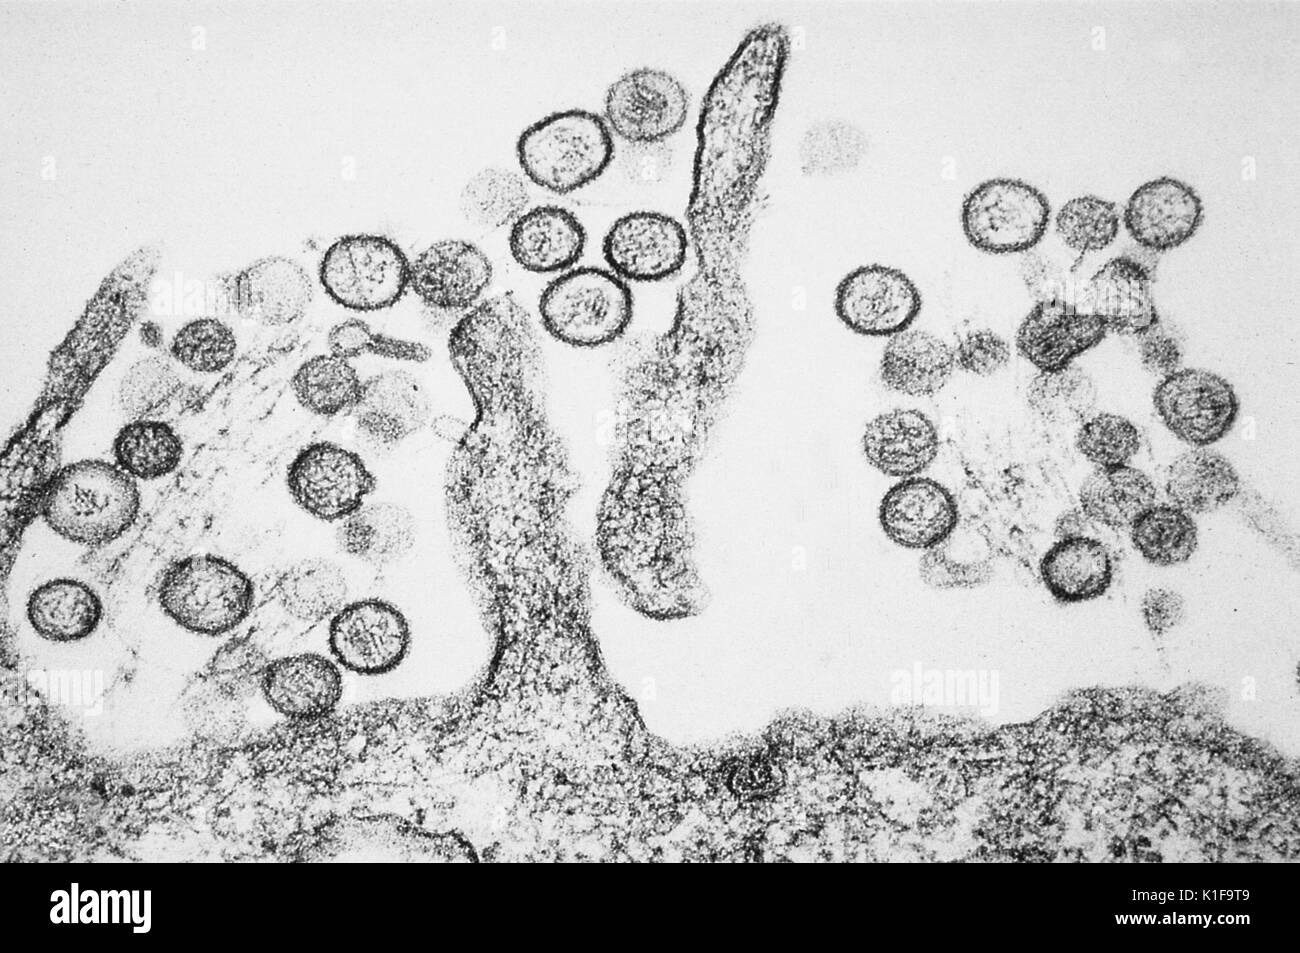 Transmission electron micrograph of the Sin Nombre Hantavirus, Hantaviruses that cause Hantavirus pulmonary syndrome (HPS) are carried in rodent droppings, especially the deer mouse Incubation lasts for 1?5wks Sickness begins with fever and muscle aches, followed by shortness of breath and coughing Image courtesy CDC/Cynthia Goldsmith, 1993. Stock Photo